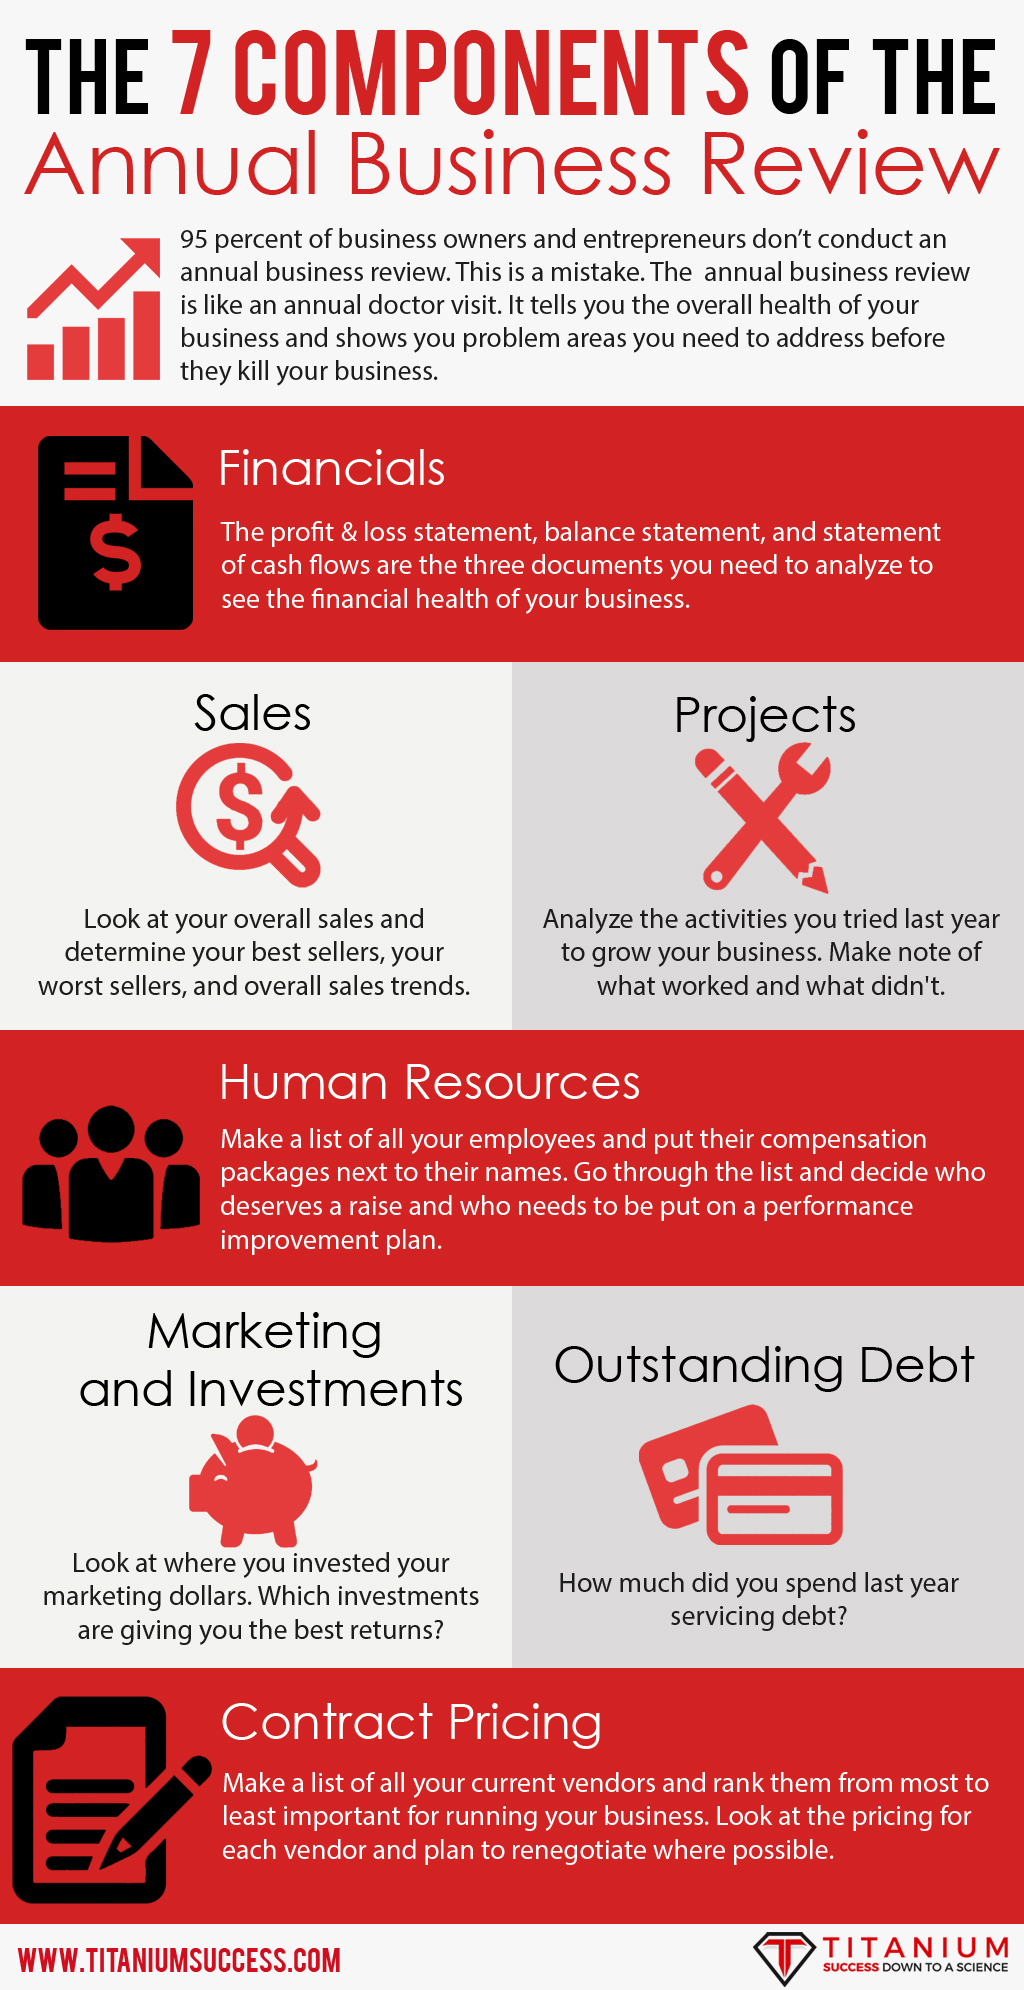 The 7 Components of the Annual Business Review Infographic - TS